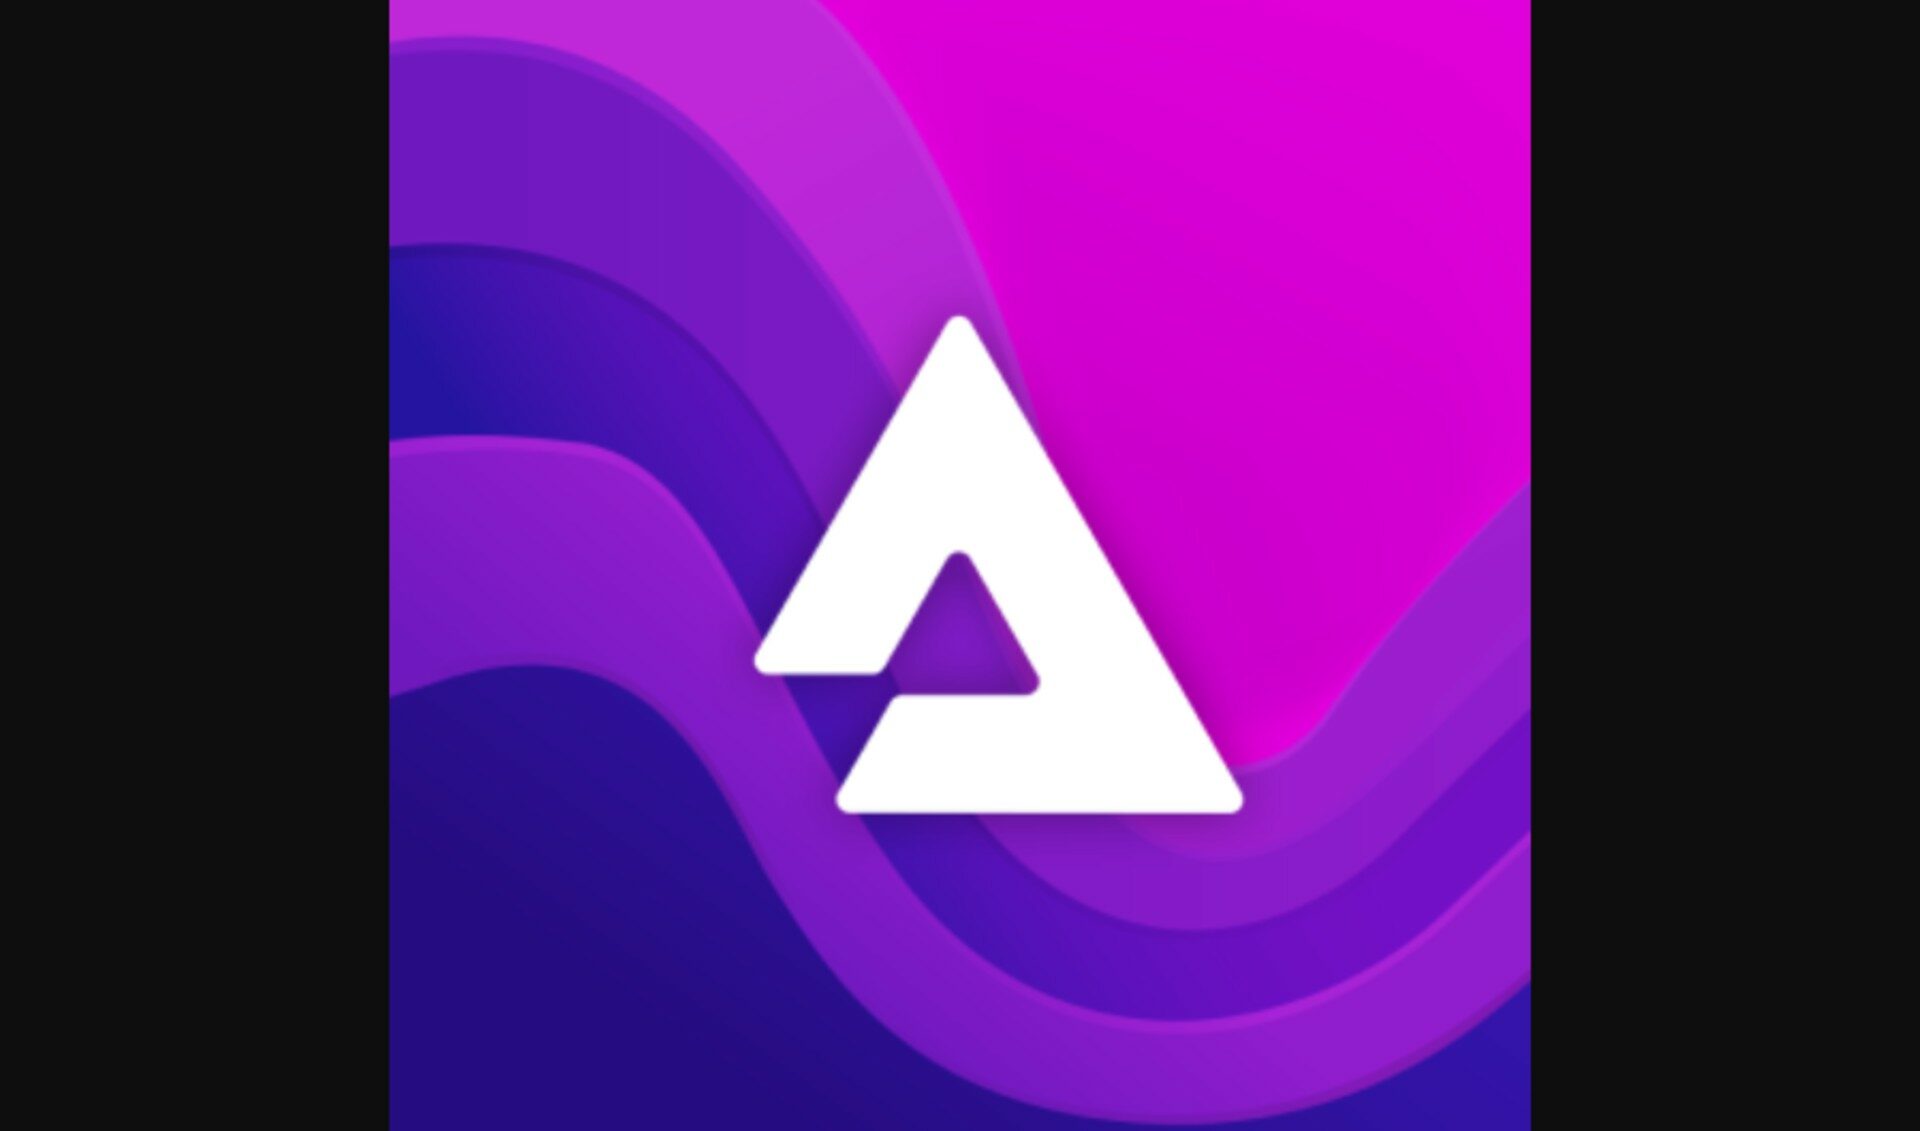 Blockchain-Based Music Streamer ‘Audius’ Will Let Artists Share Their Tracks Directly To TikTok